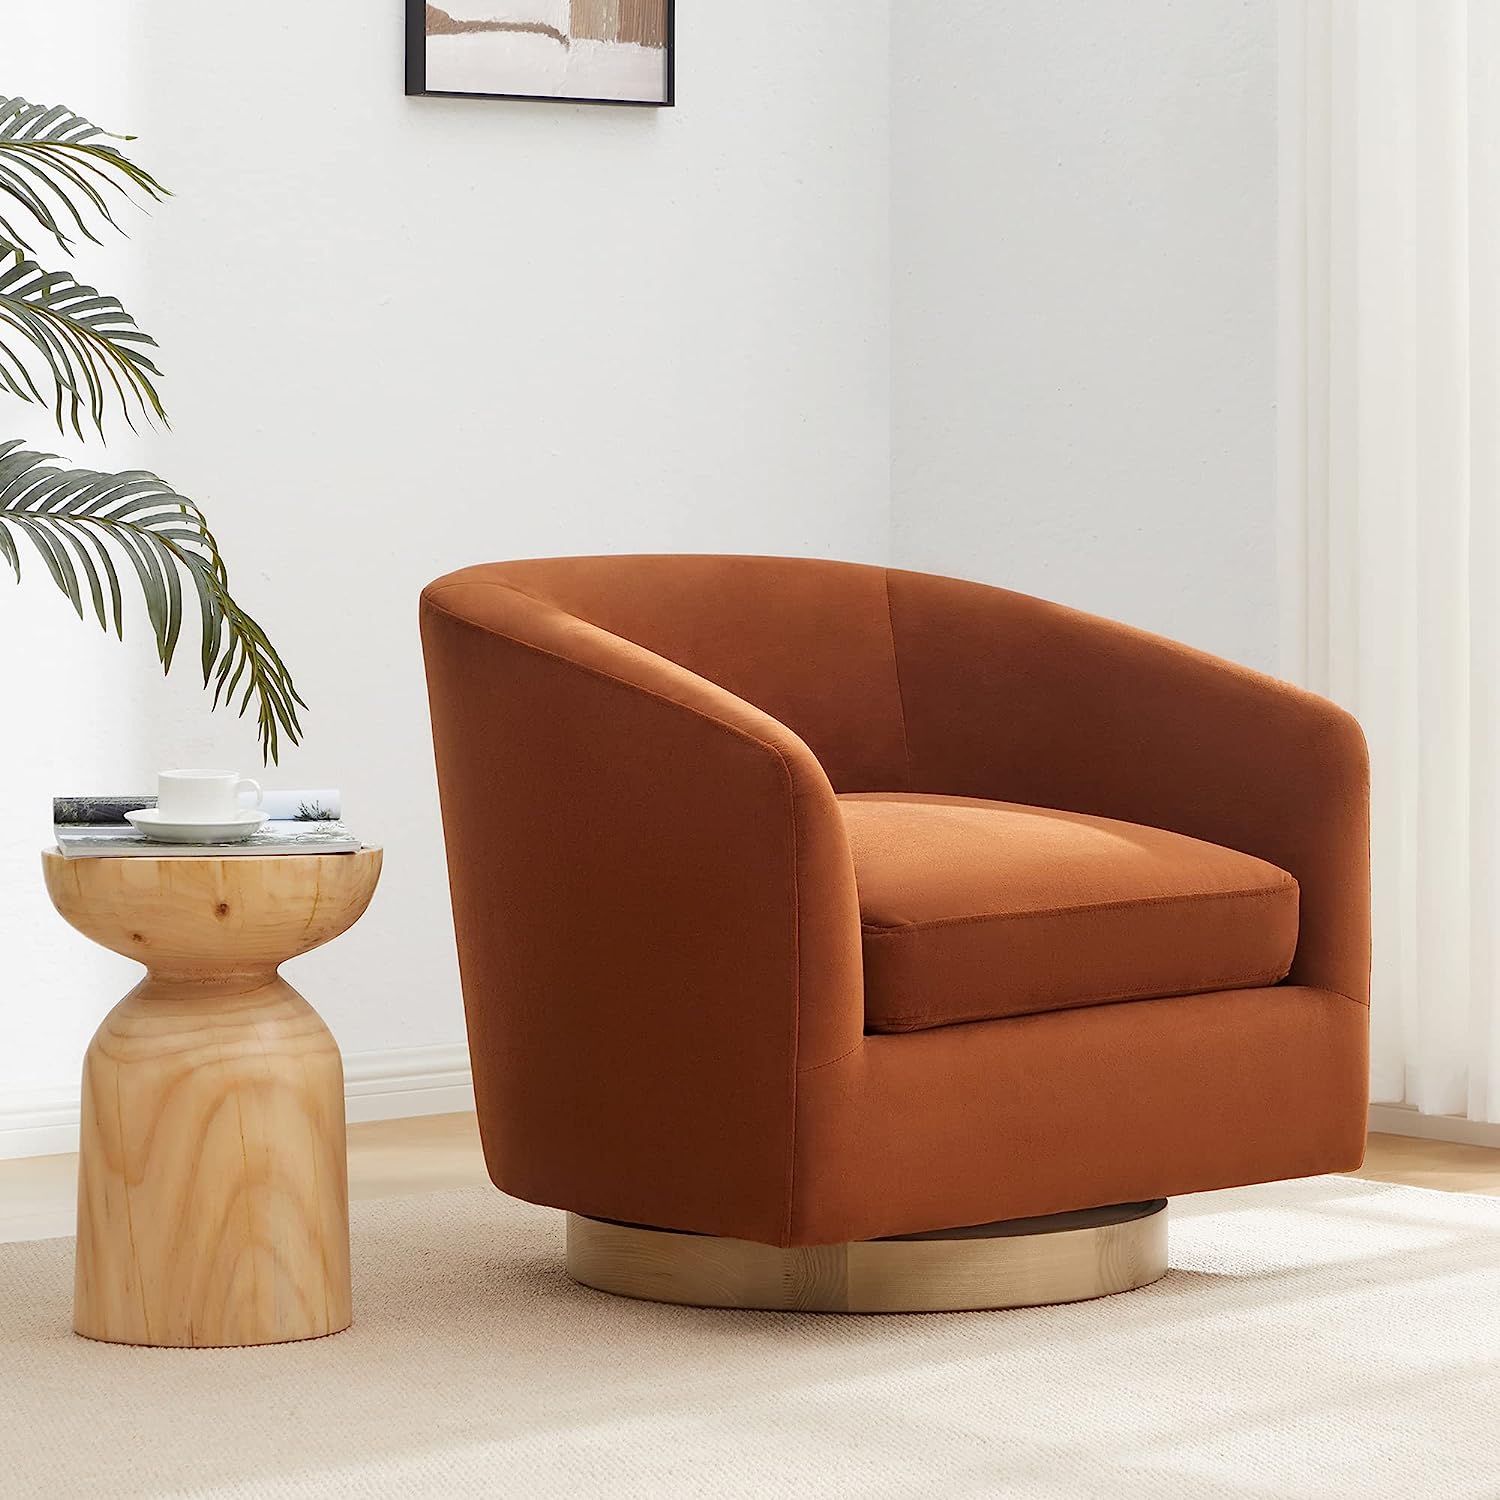 orange comfy swivel chair with wooden base sophisticated colorful velvet furniture for living room comfortable swivel chairs for sale online on amazon high quality designer furniture